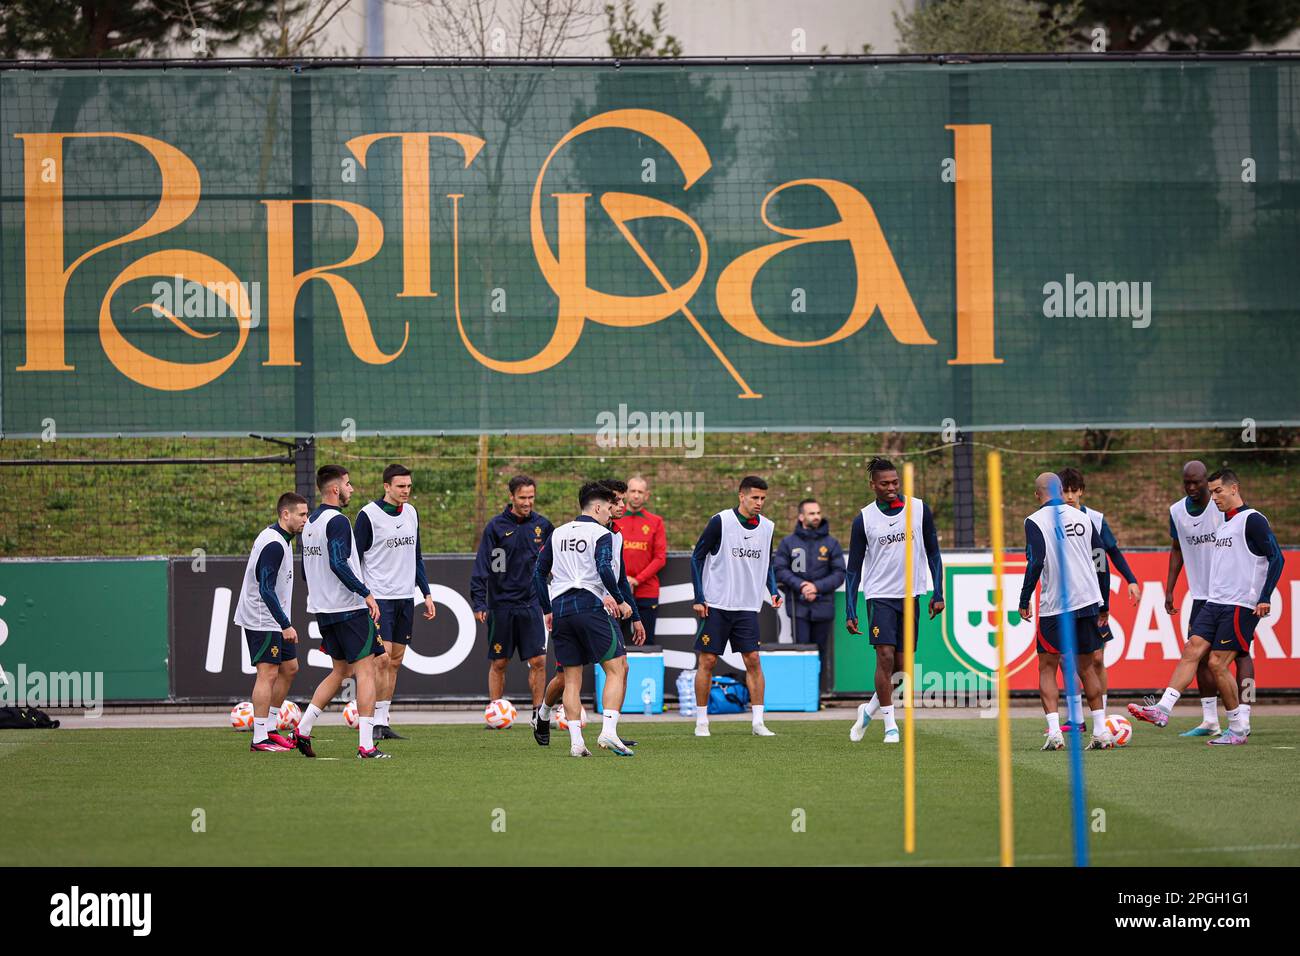 11837853 - UEFA European Qualifiers - Portugal training sessionSearch